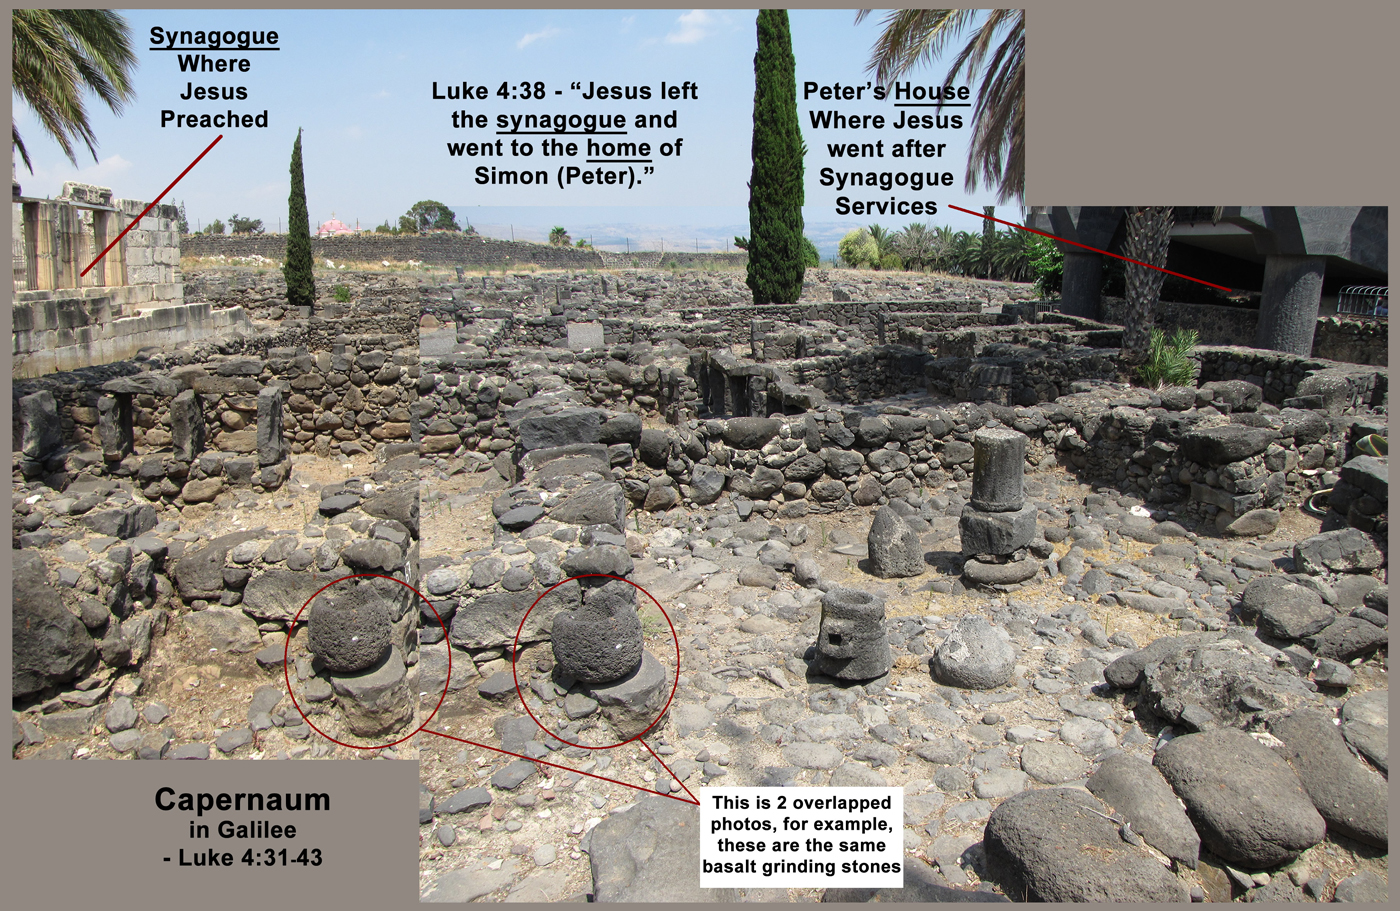 Overview of Capernaum with Synagogue, Peter's House, Residential Area